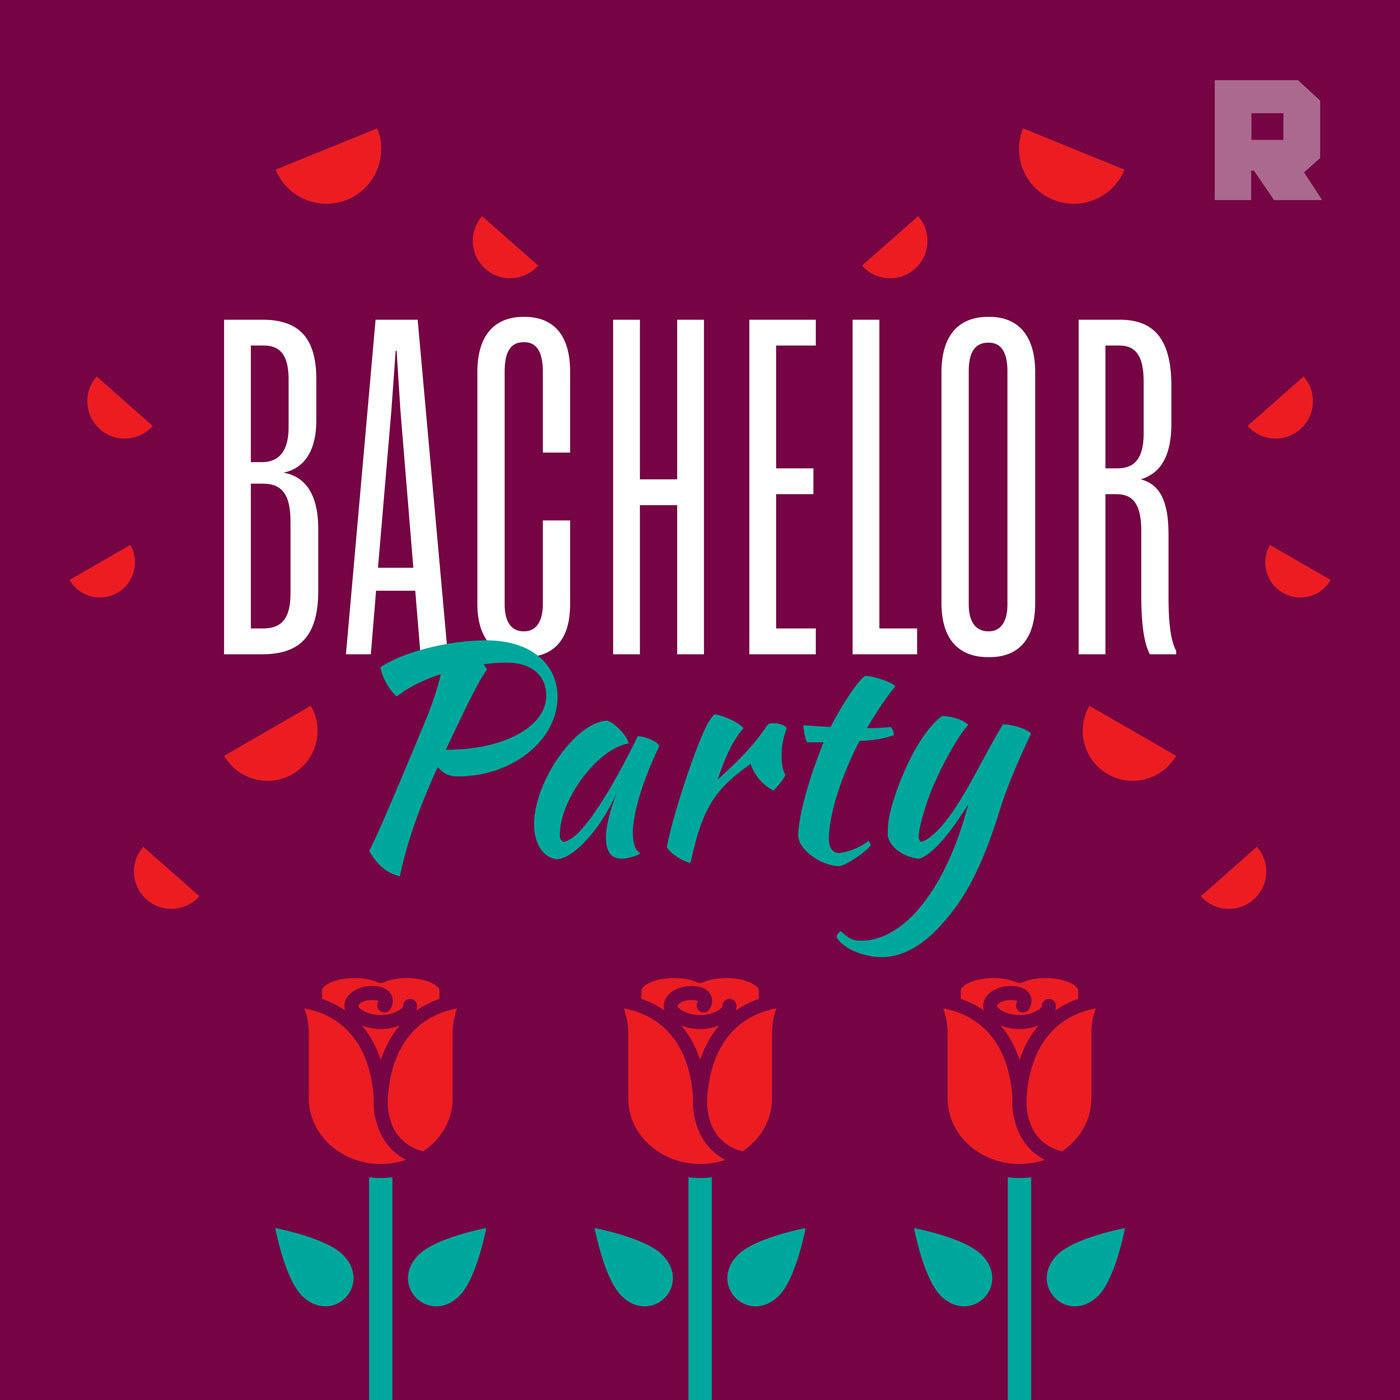 Top Reality Rewatches, Tyler C. and the Quarantine Crew, and Bach Nation on TikTok  | Bachelor Party